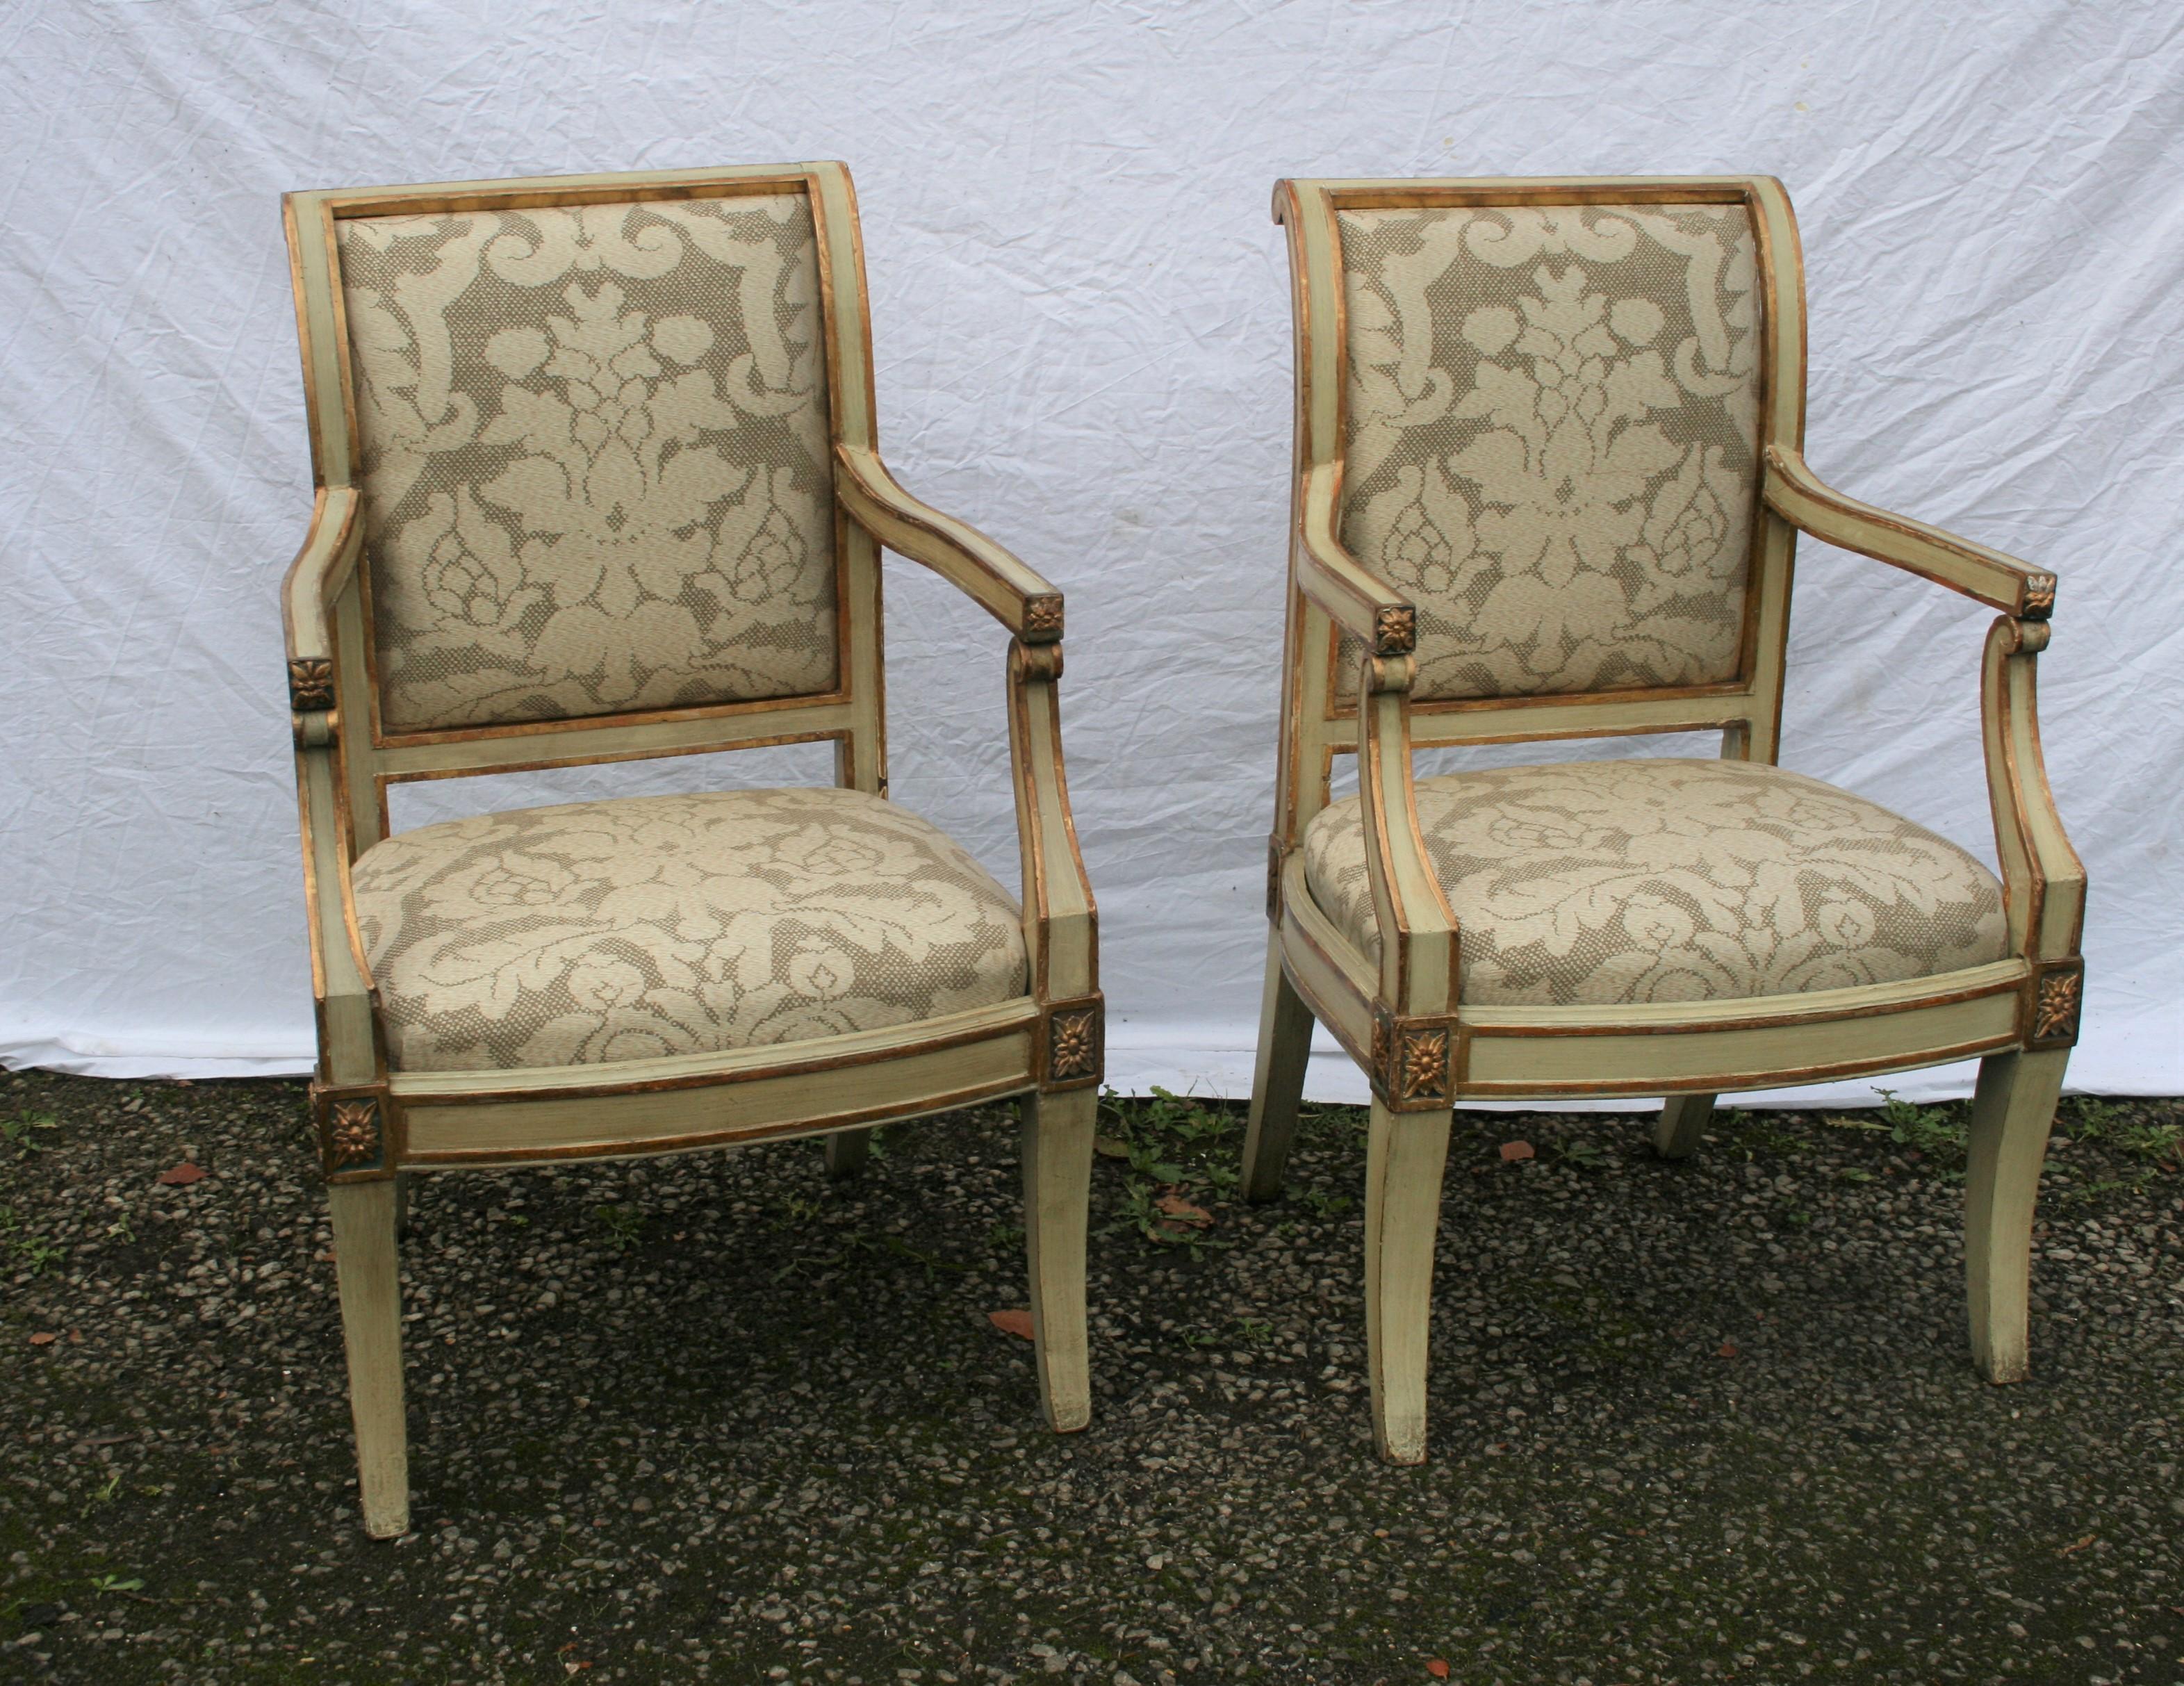 Well decorated pair of Italian chairs in original paint with new silk fabric (by design these chairs have drop in seat and back so easily recovered.
  